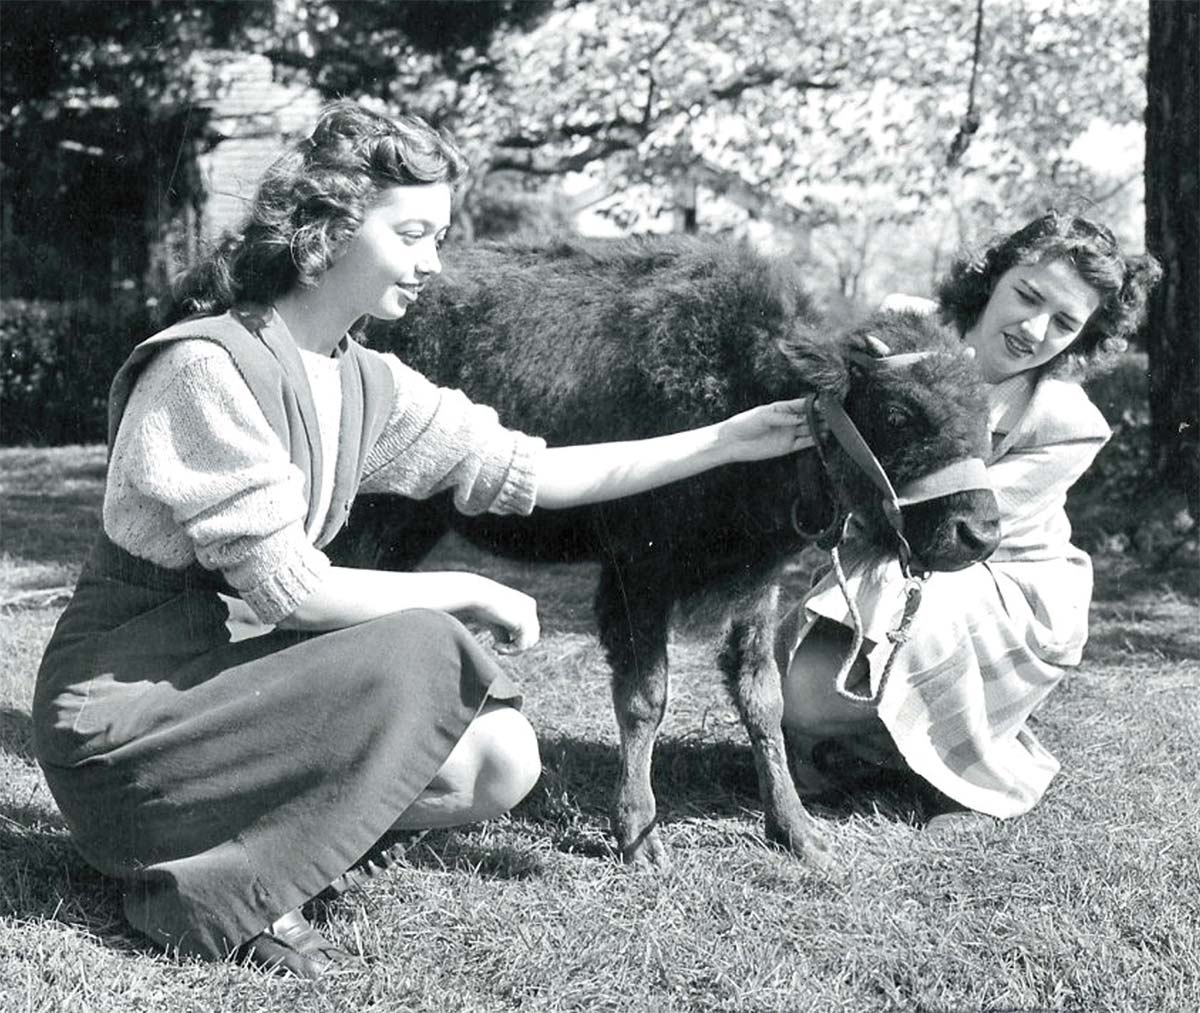 Shirley Shumberger and Jean McKernan with Bucky, who made his first appearance at the 1946 Centennial Homecoming game